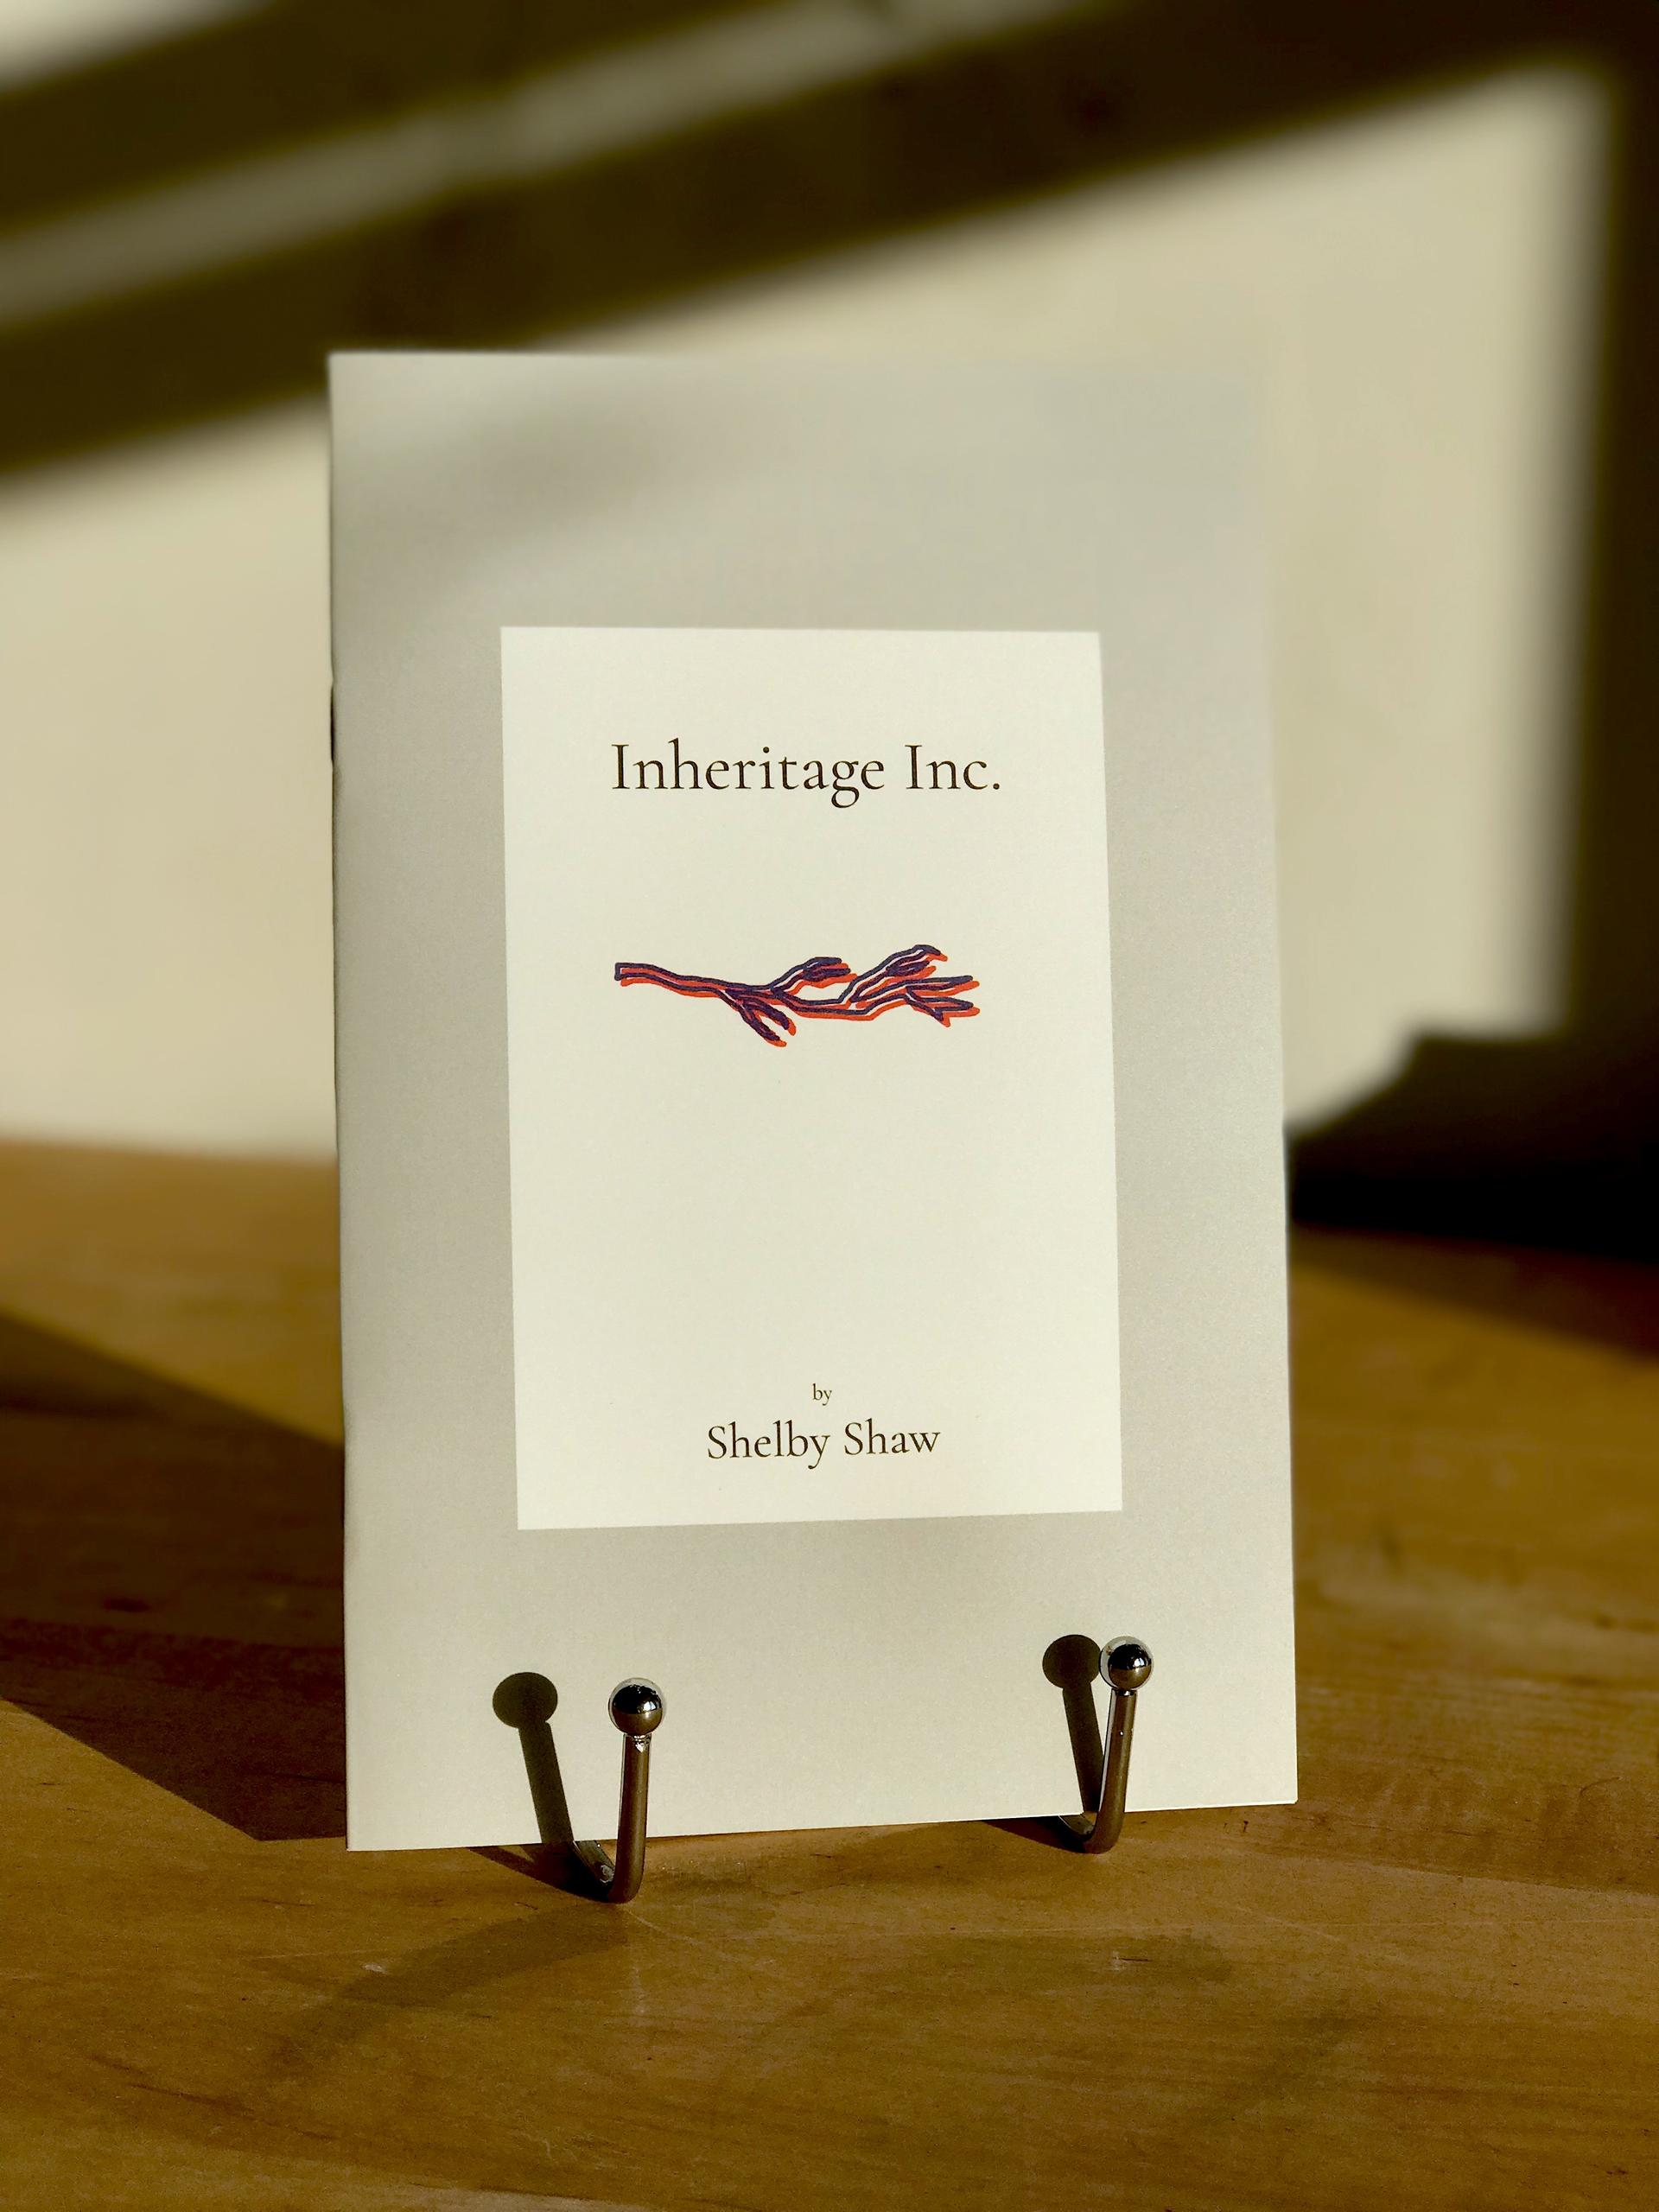 The book 'Inheritage Inc.' which is a grey color with white center rectangle containing the title in black font and a red and blue illustration of a tree branch, is displayed on a silver book stand atop a wooden tabletop with a white wall in the background.